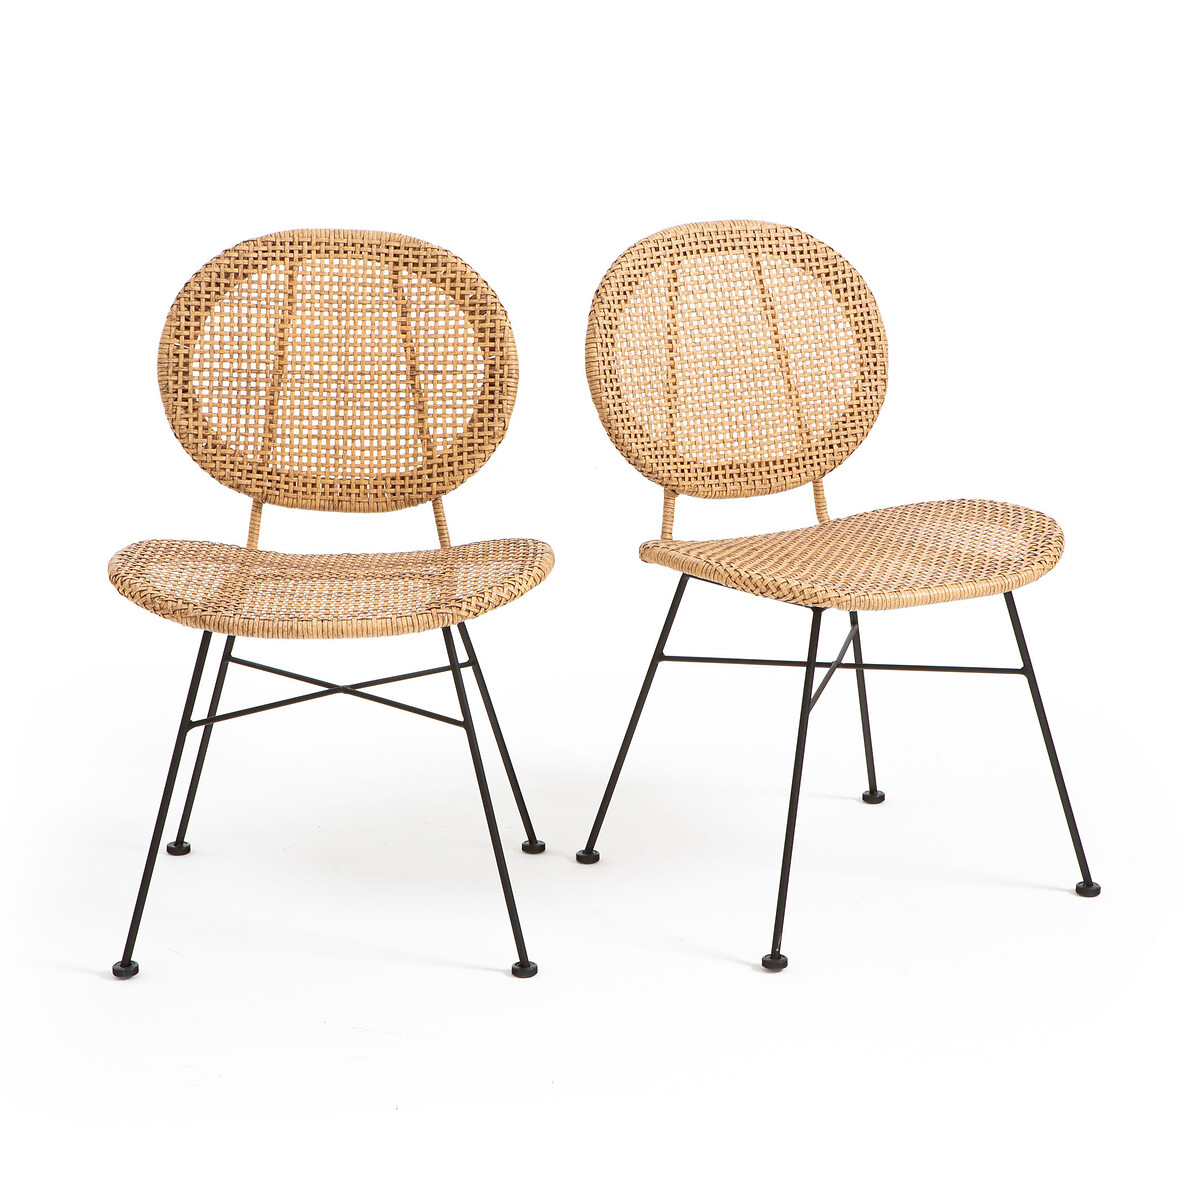 Set of 2 Rubis Woven Resin Chairs